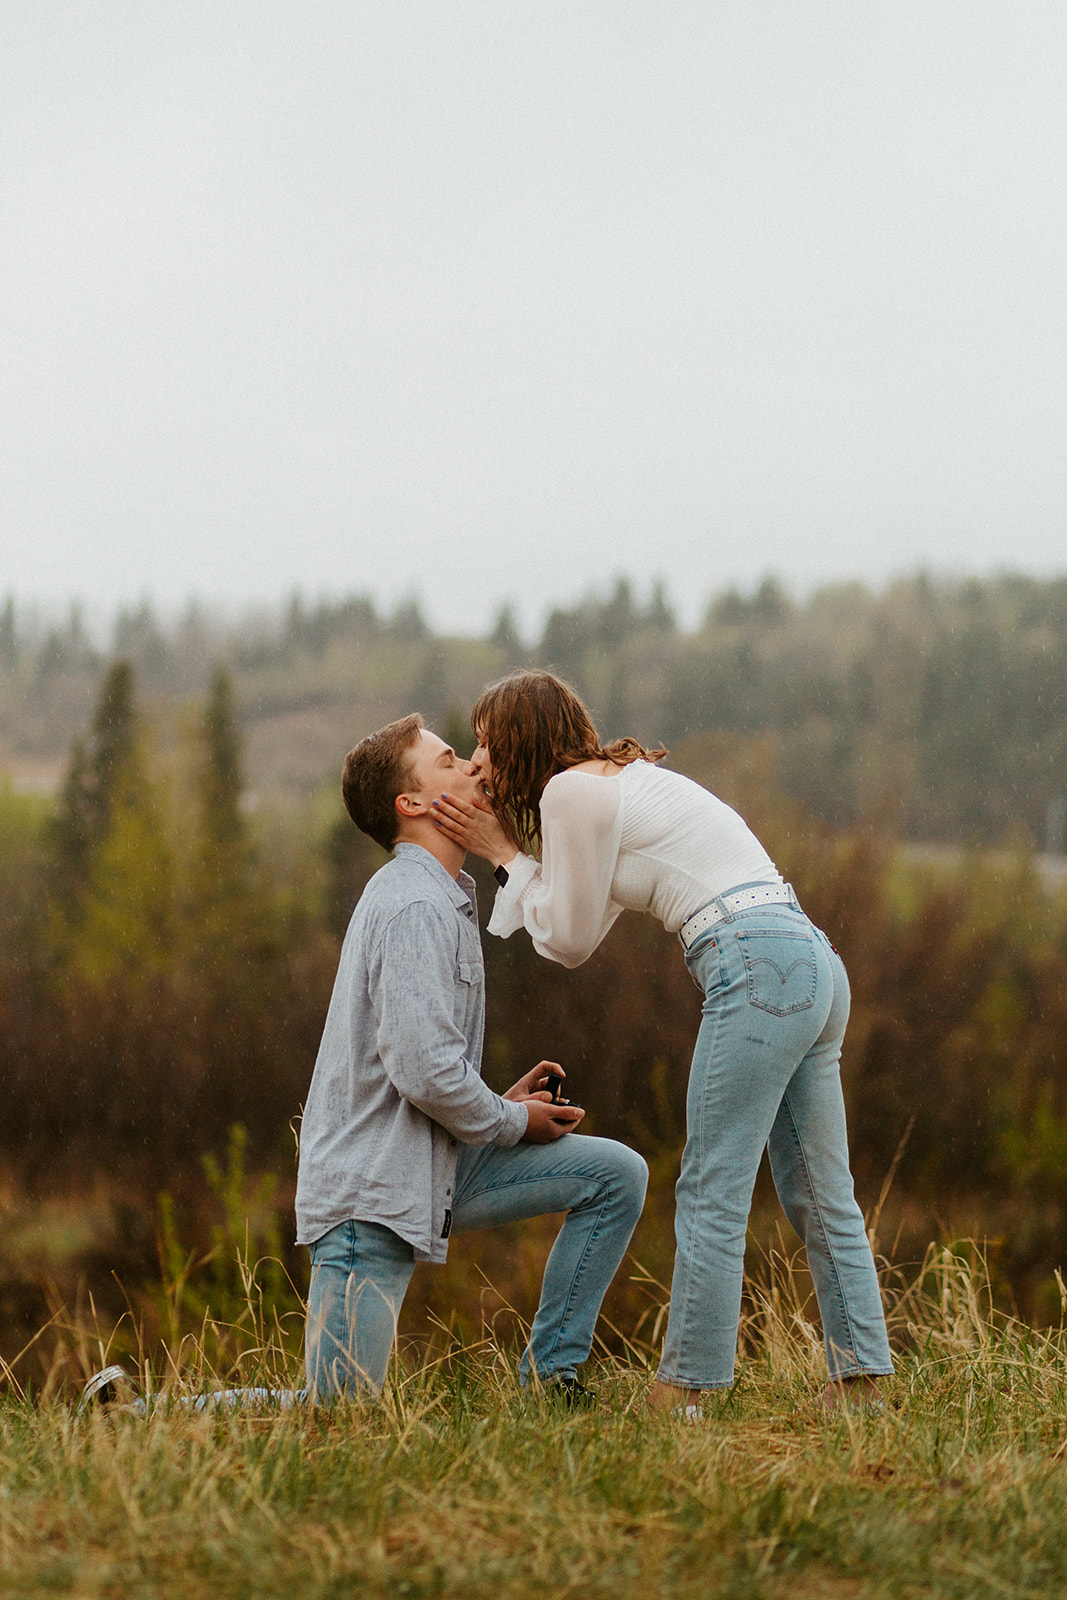 Rainy day proposal captured on film reminding us of the Notebook